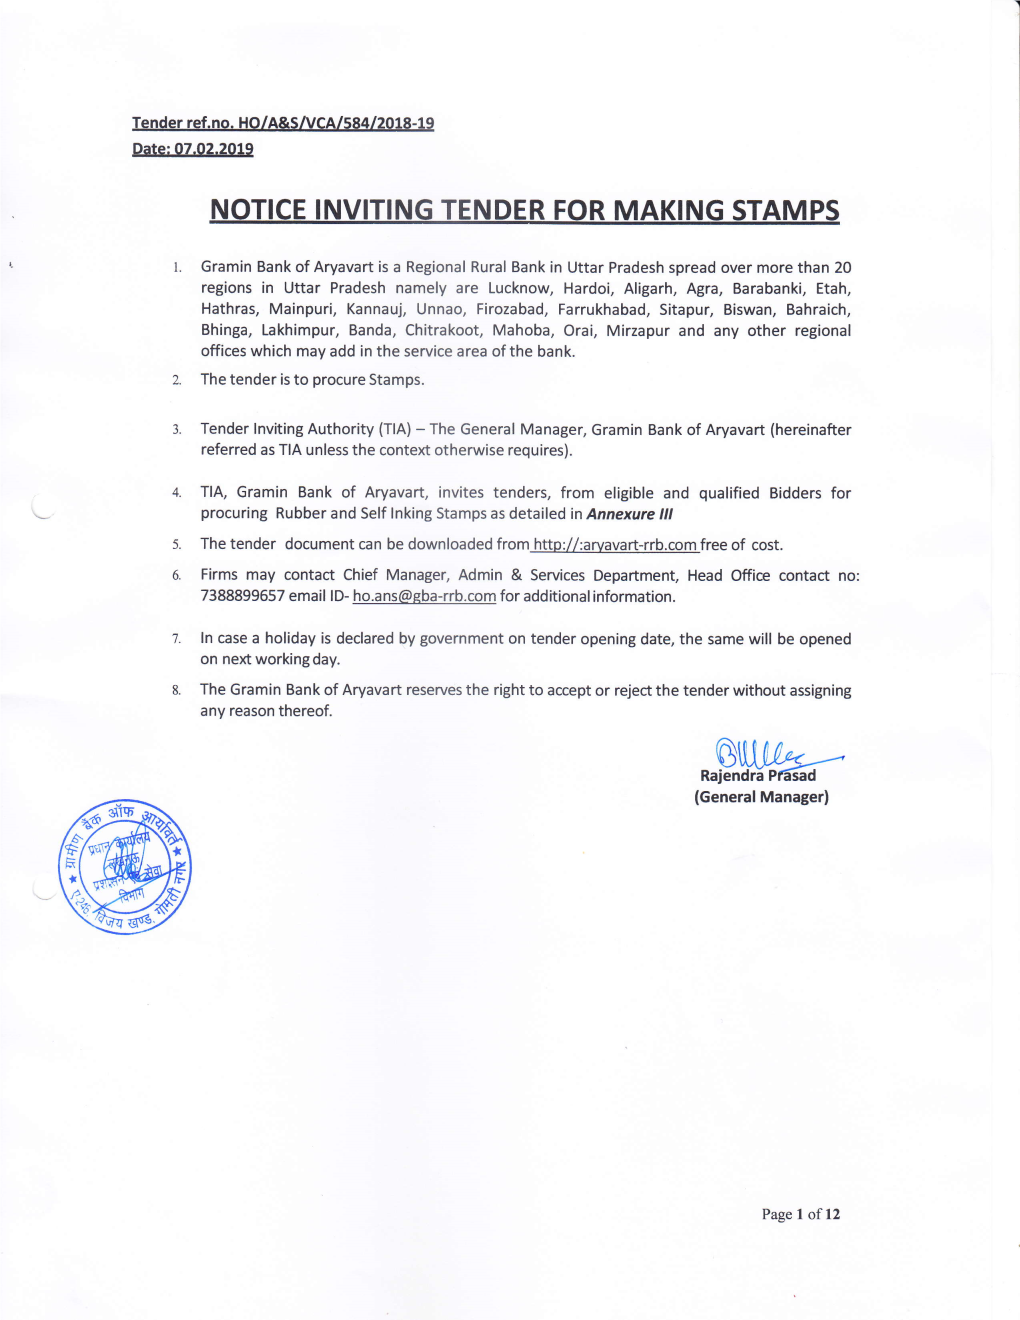 Tender for Stamps.Pdf